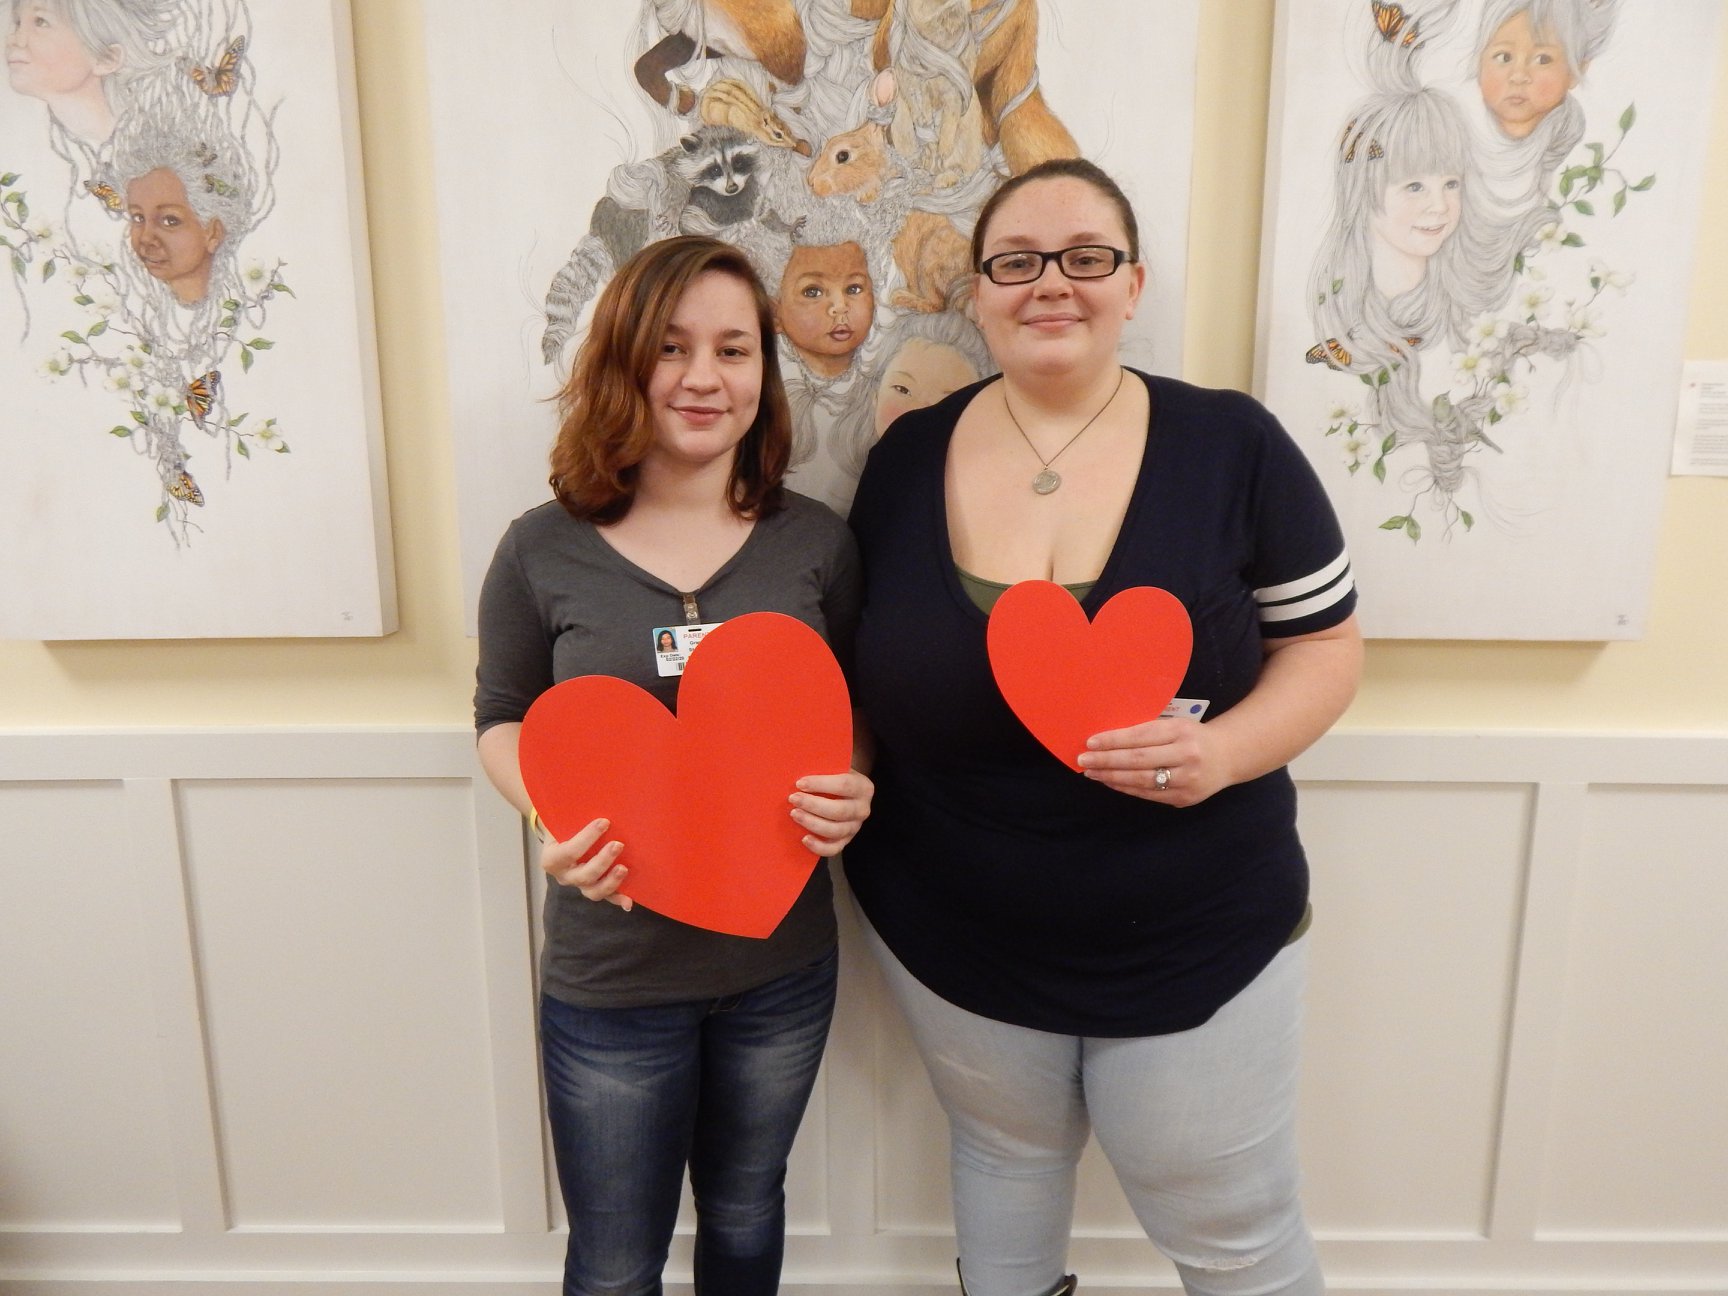 RMHCA Heart photos 1 Each valentine you send to families at the Ronald McDonald House is matched with a $10 donation—here's how